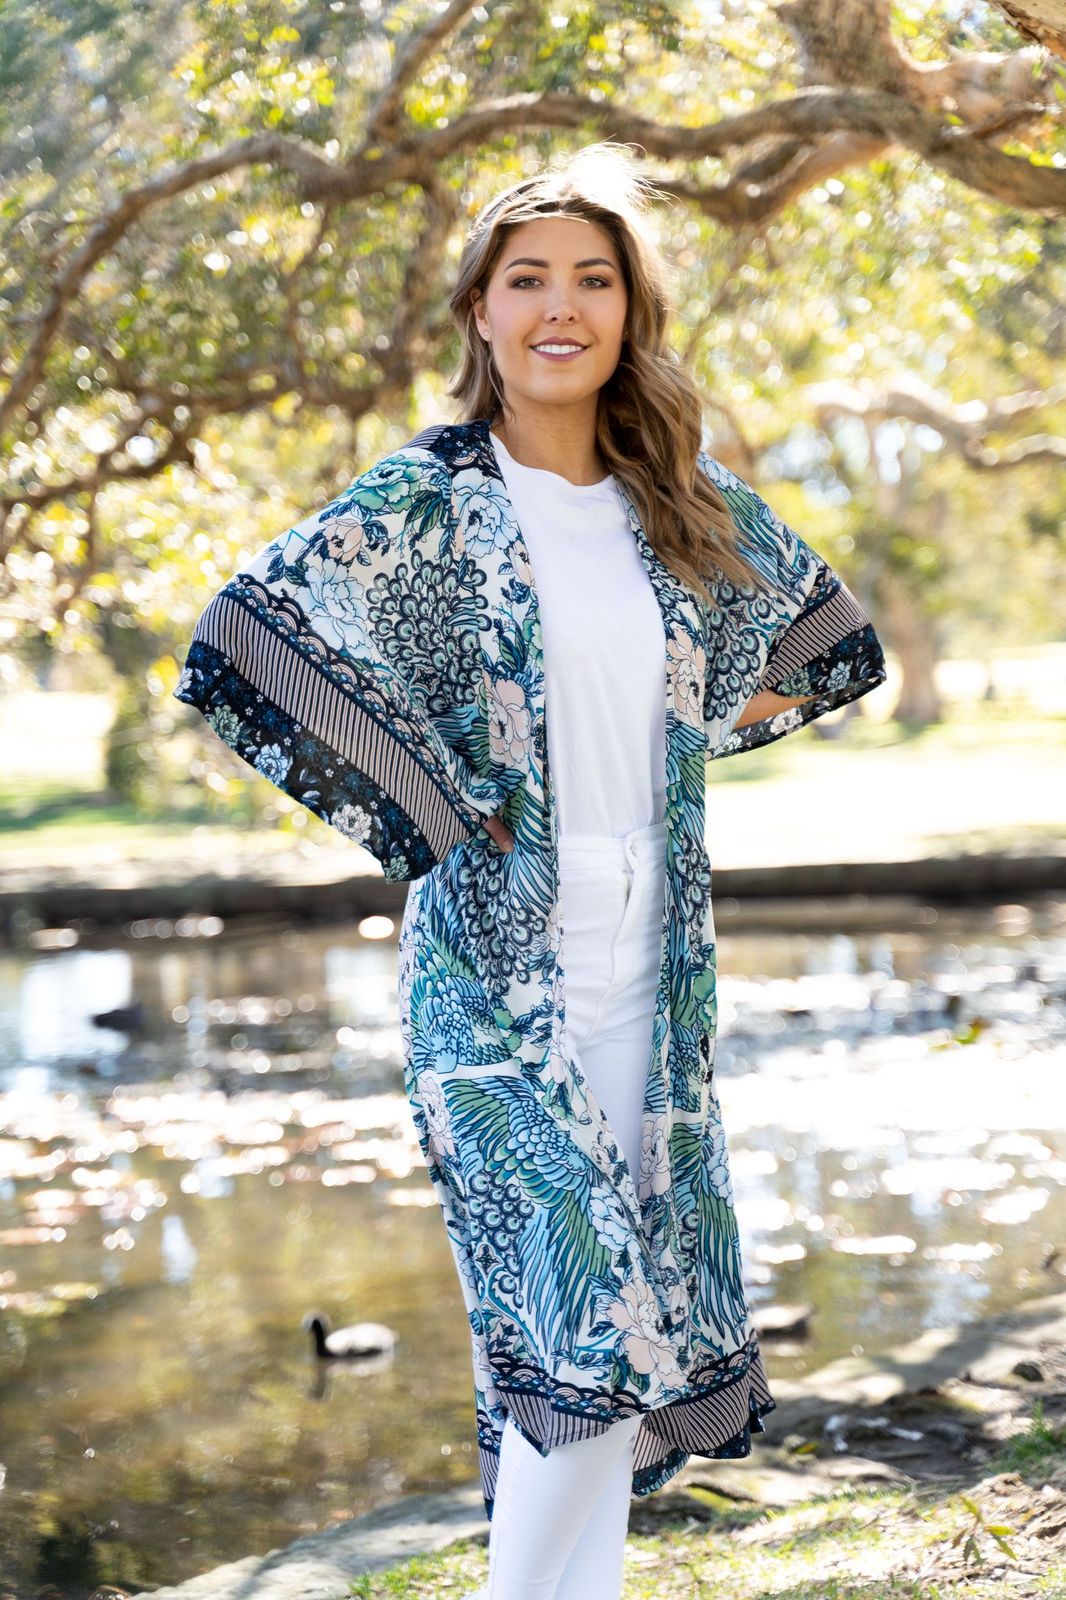 Boho Cape: A simple and easy way to brighten up the most basic of outfits - chuck on and go! These gorgeous Boho Cape's come in a range of eye-catching prints to level up your  - Ciao Bella Dresses